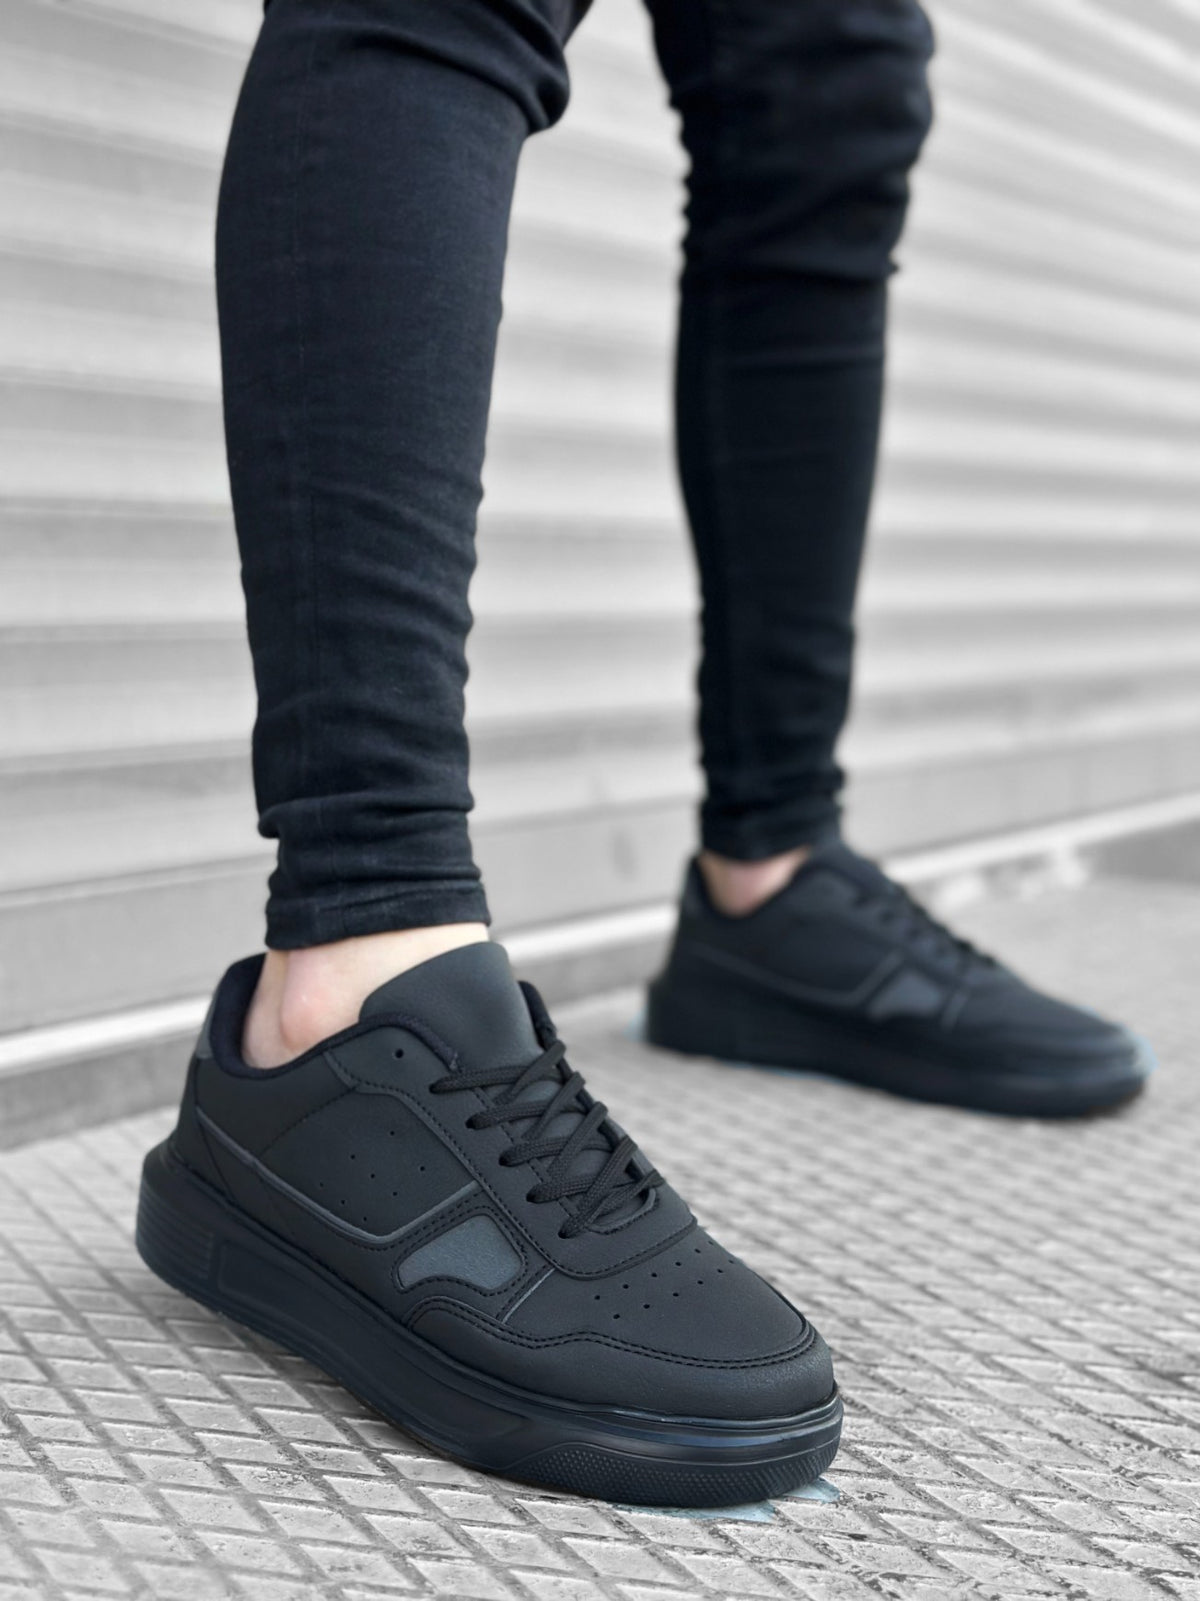 BA0221 Thick High Sole Lace-Up Black Men's Sneakers Shoes - STREETMODE™